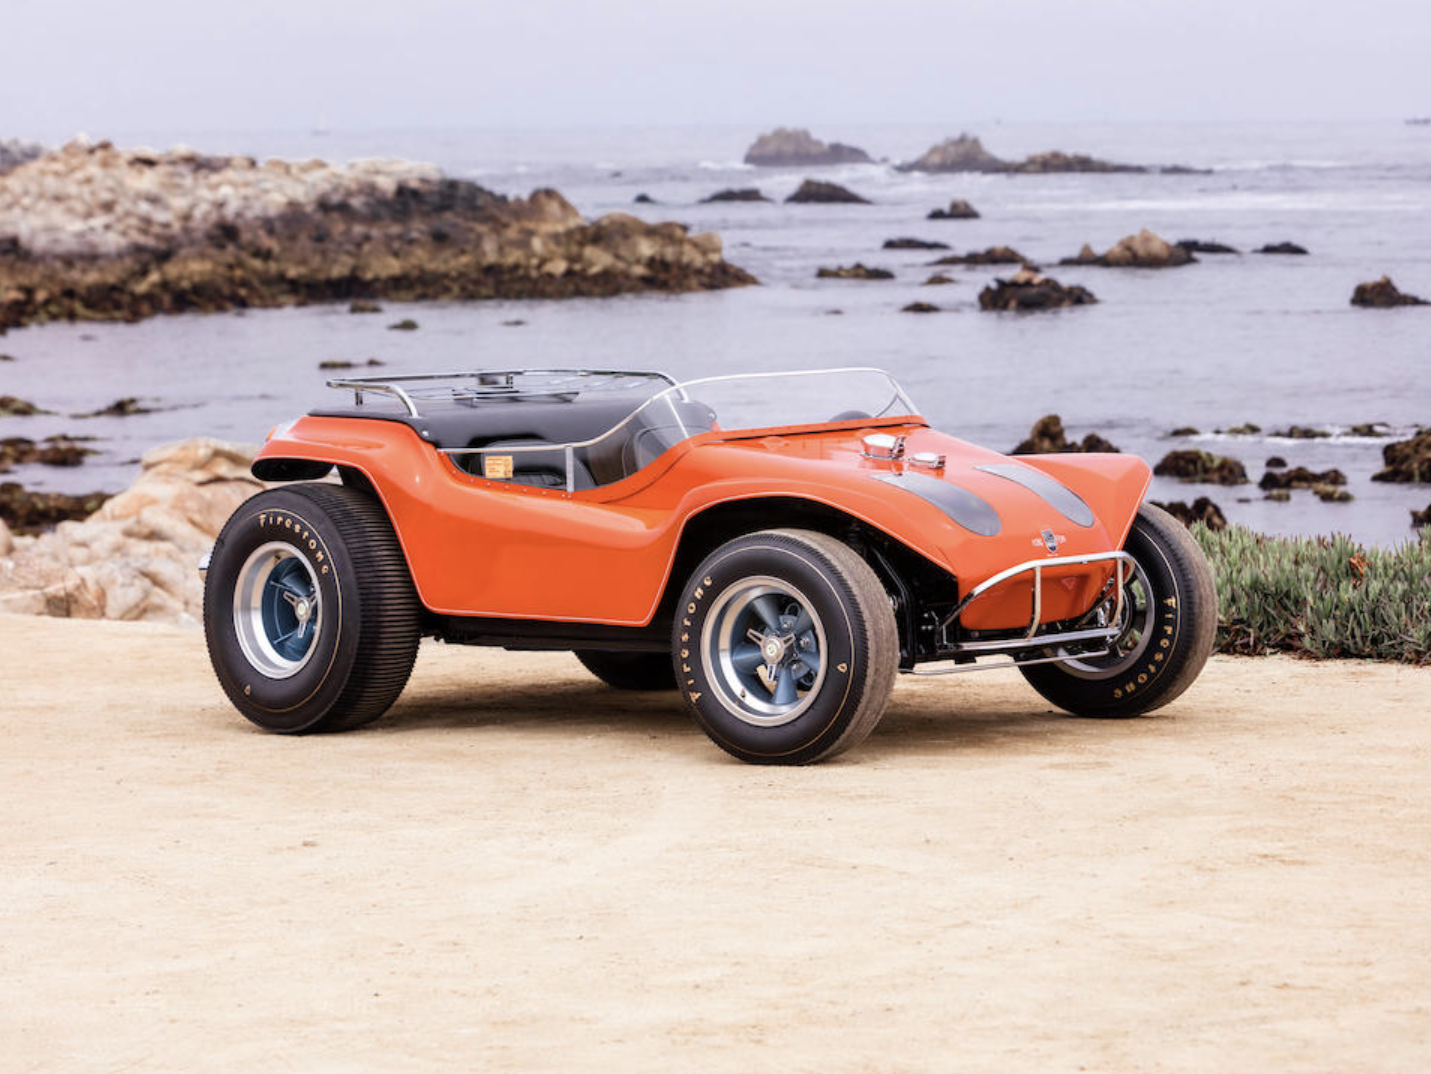 This dune buggy was driven by Steve McQueen in the cinematic classic "The Thomas Crown Affair".